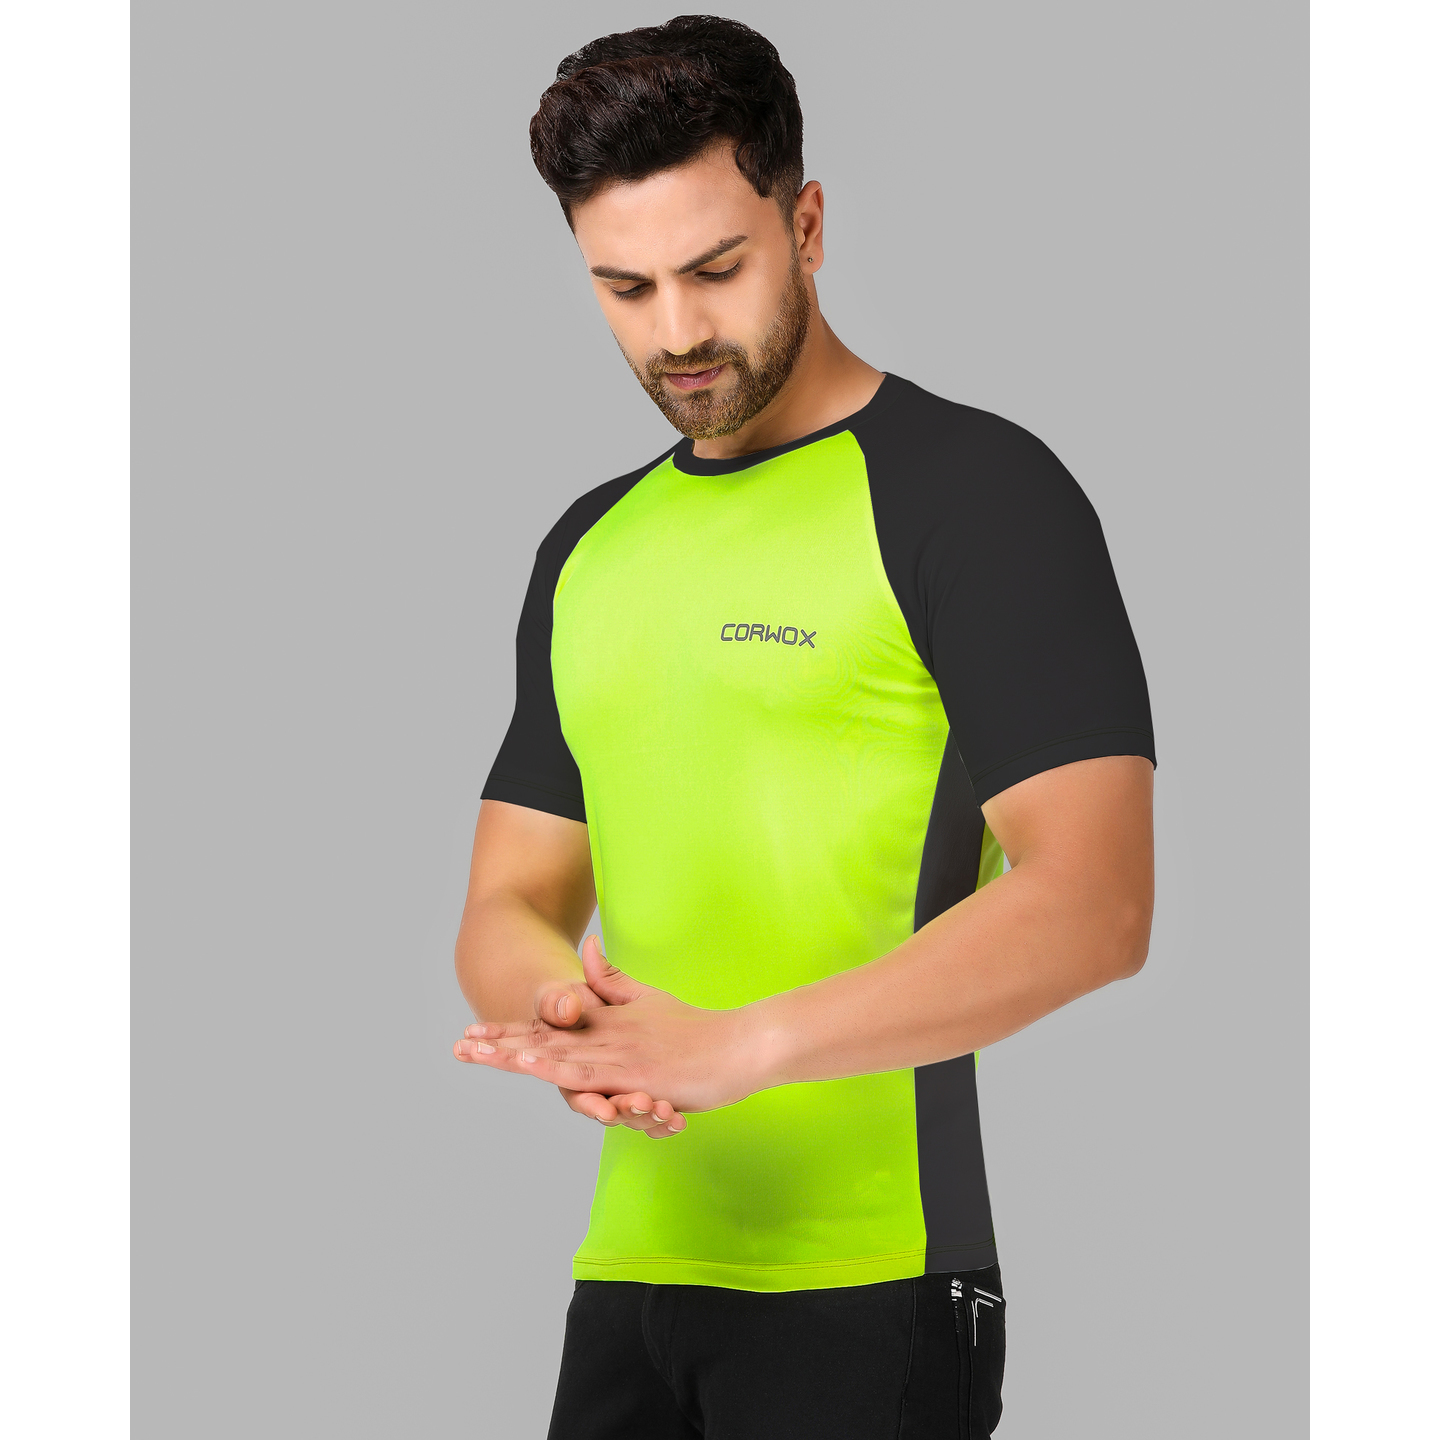 CORWOX Mens Active Neon Green & Black Sports Polyester T-Shirt